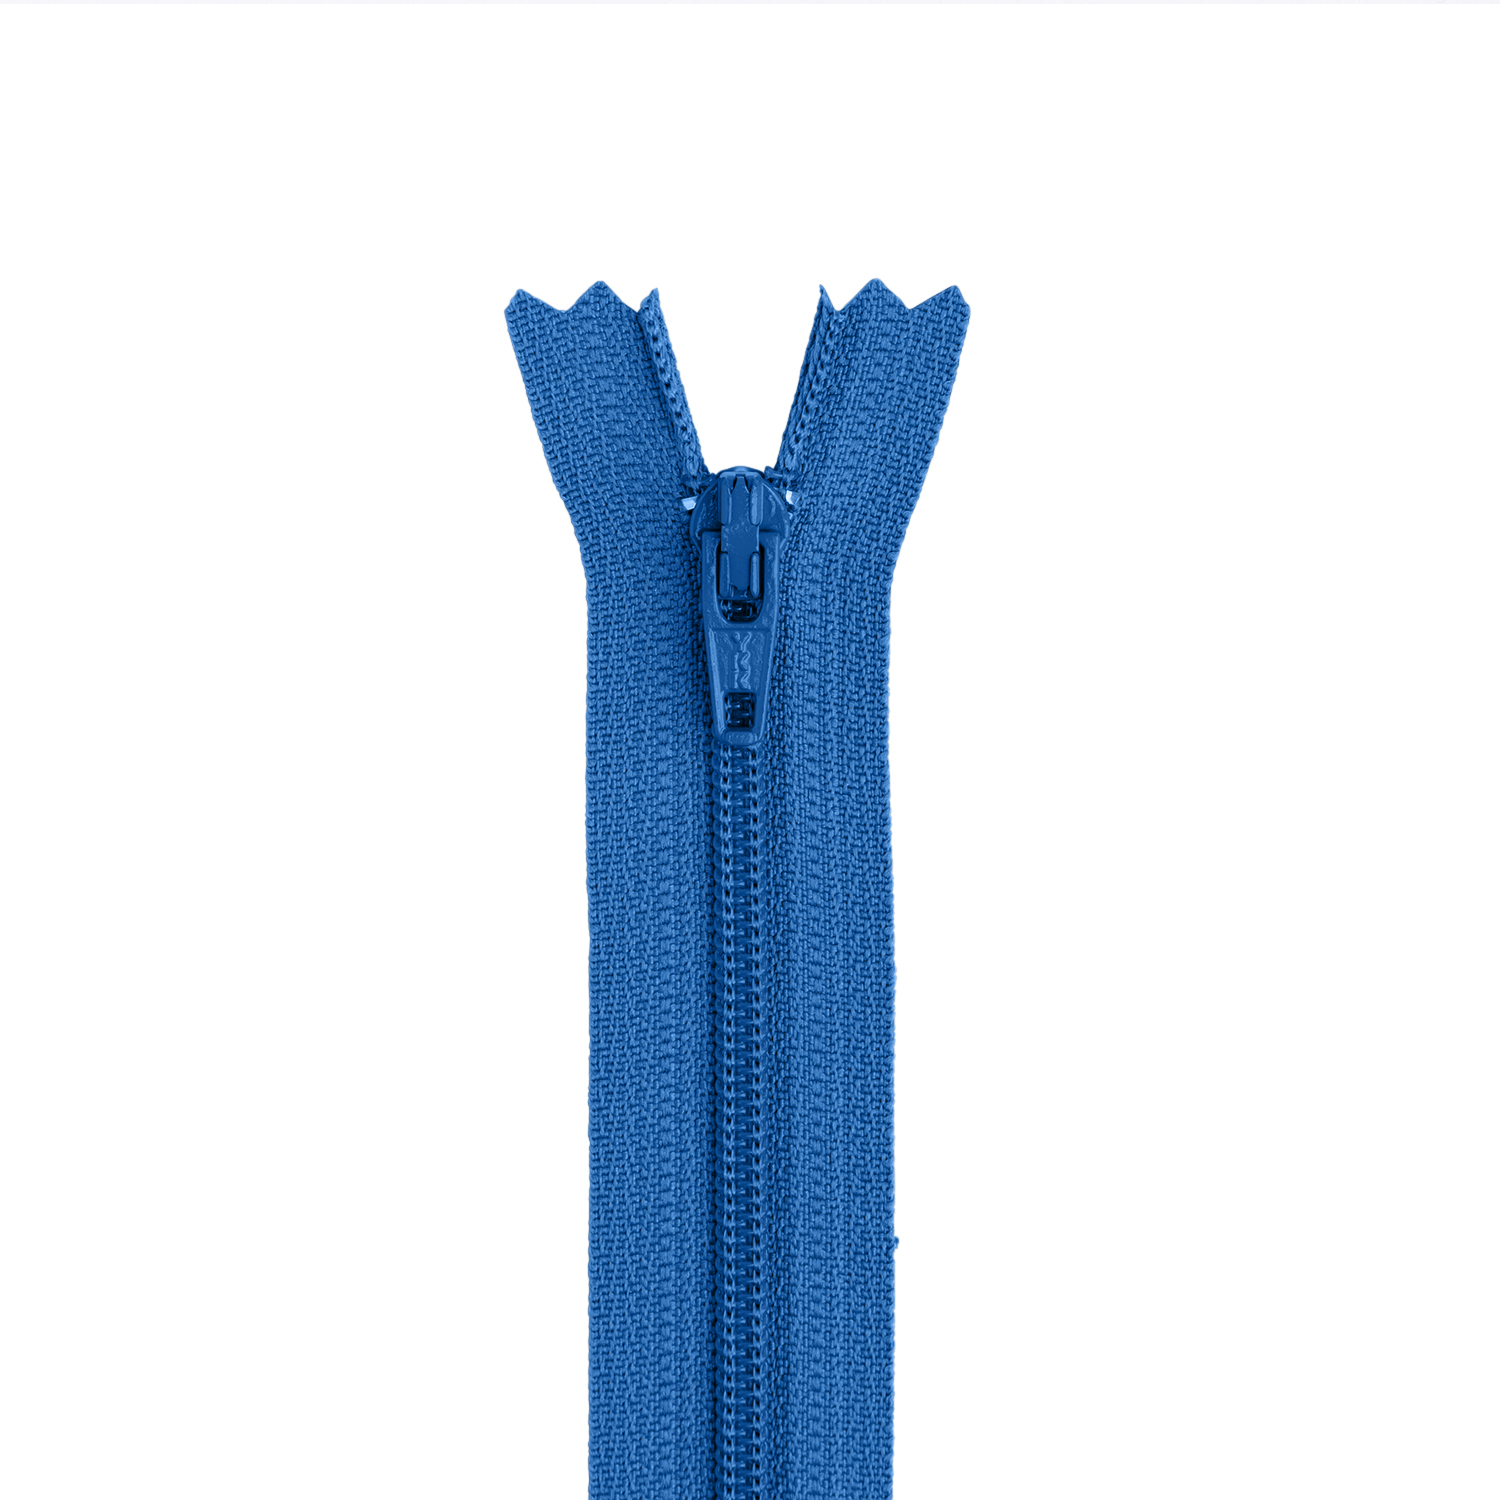 3 Nylon Coil Closed-End Wholesale Zippers, 50% OFF